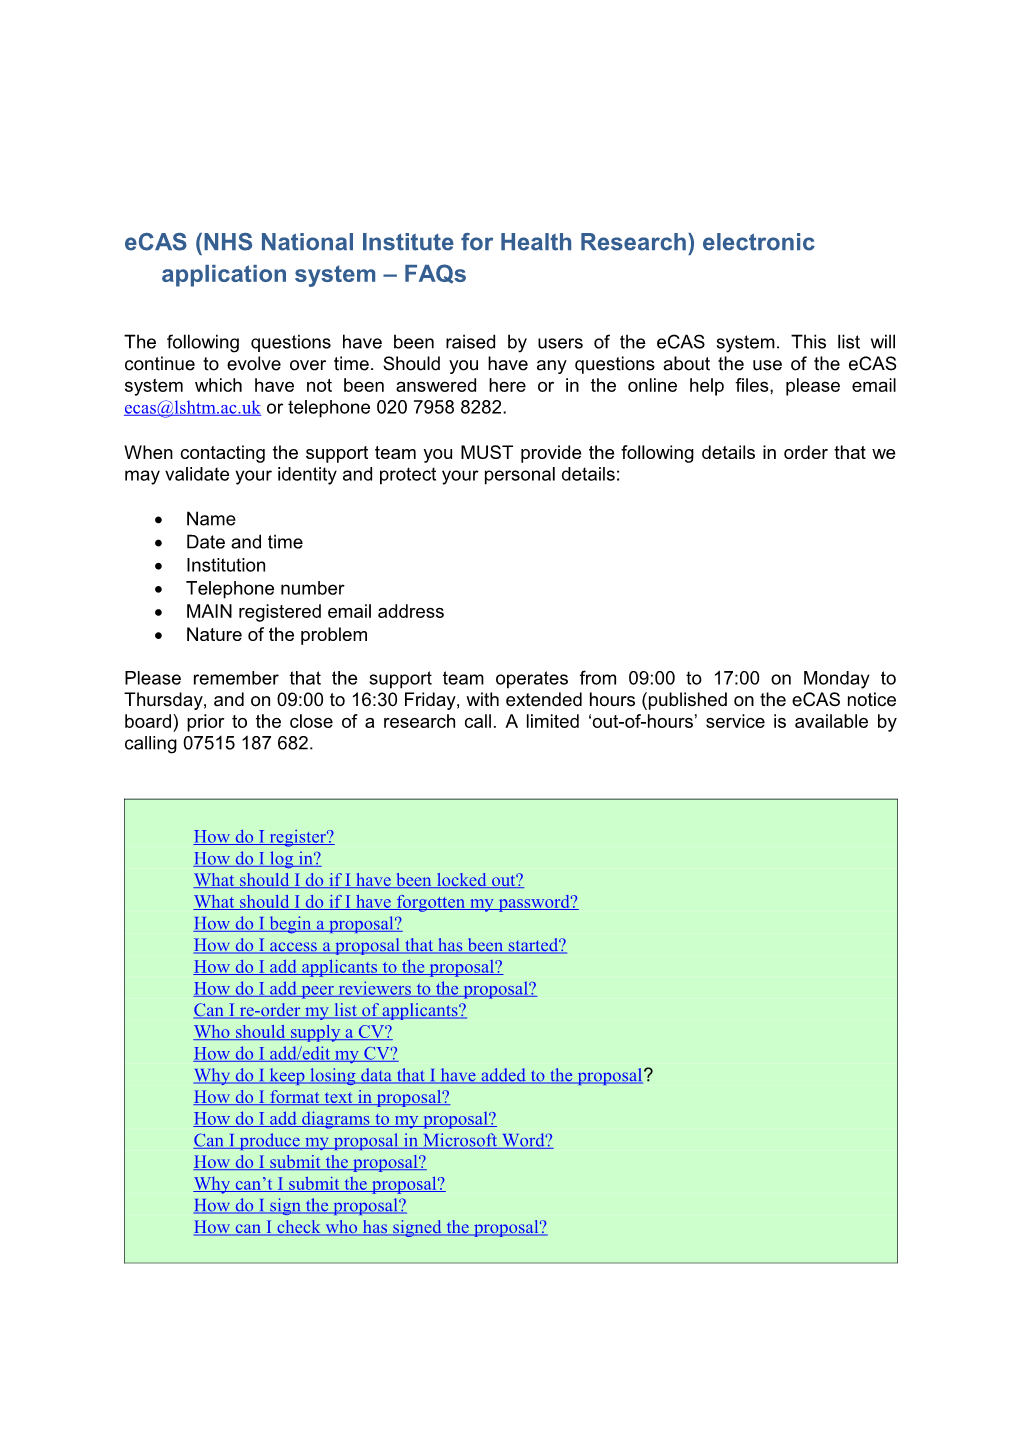 Ecas (NHS National Institute for Health Research) Electronic Application System Faqs